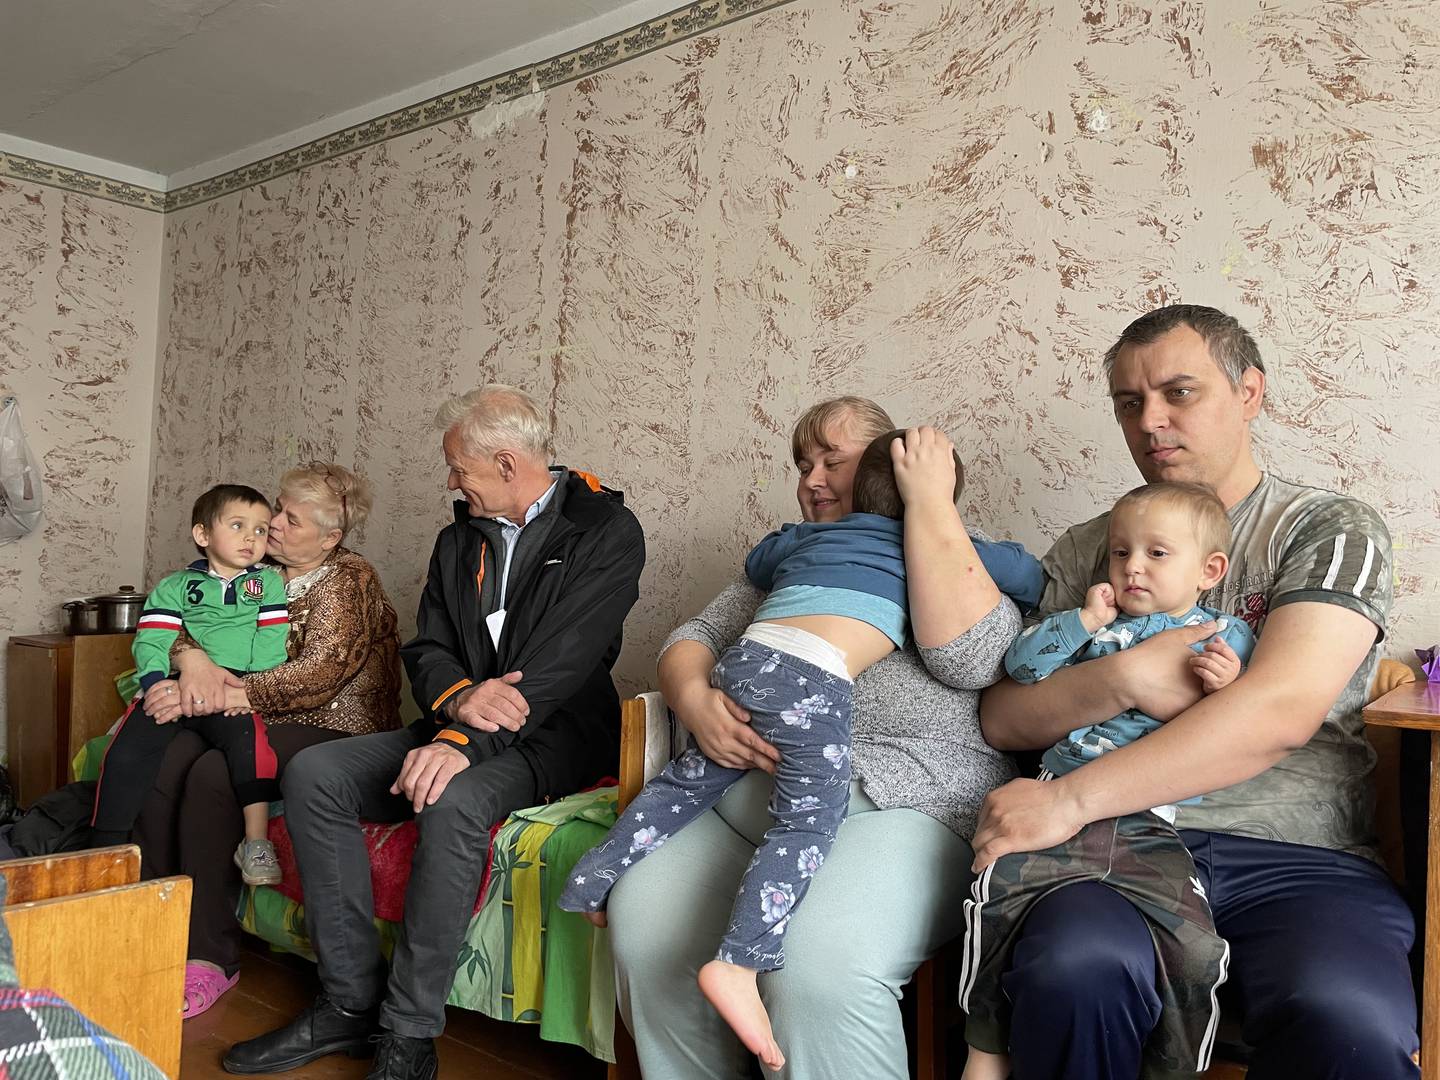 Jan Egeland meets internally displaced families in a collective site for displaced people in Novyi Rozdil city, Lviv region.

The family fled from Kharkiv. Only days after arriving to safety in Lviv, they learned that their home was completely destroyed by heavy shelling. They worry for their relatives that stayed back home, and fear new shelling in Lviv.

Photo: Laila Matar/NRC